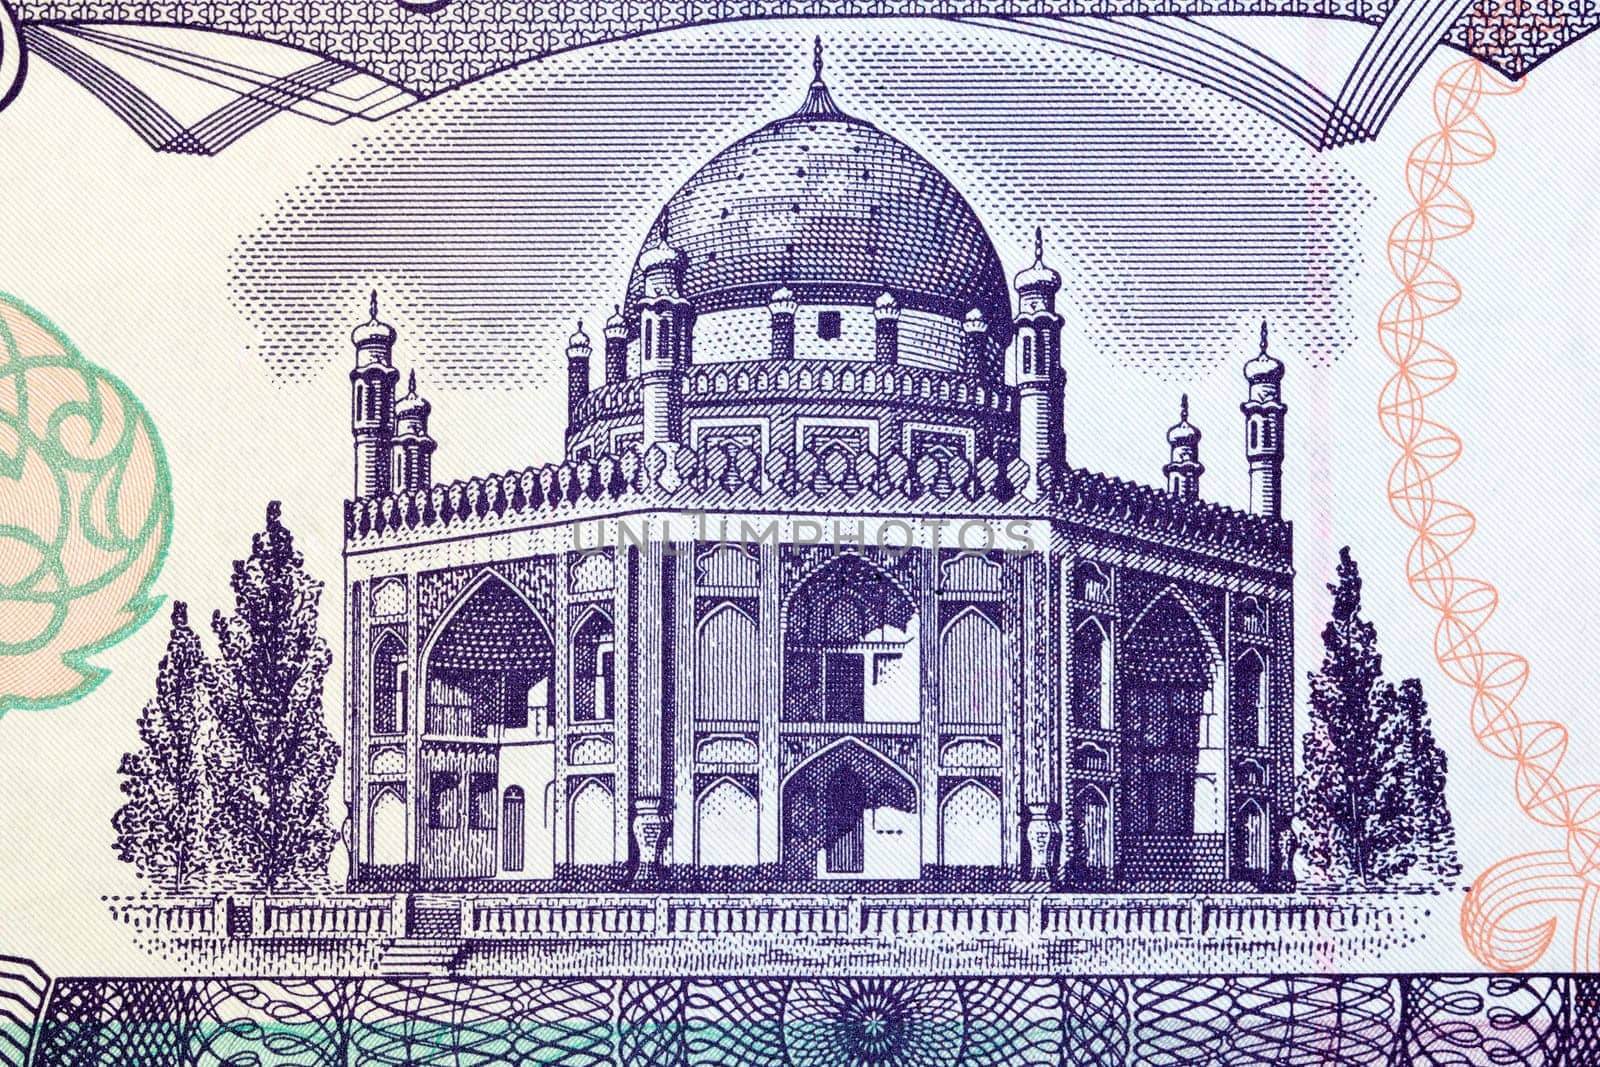 Mausoleum of Ahmed Shah Durrani from Afghani money